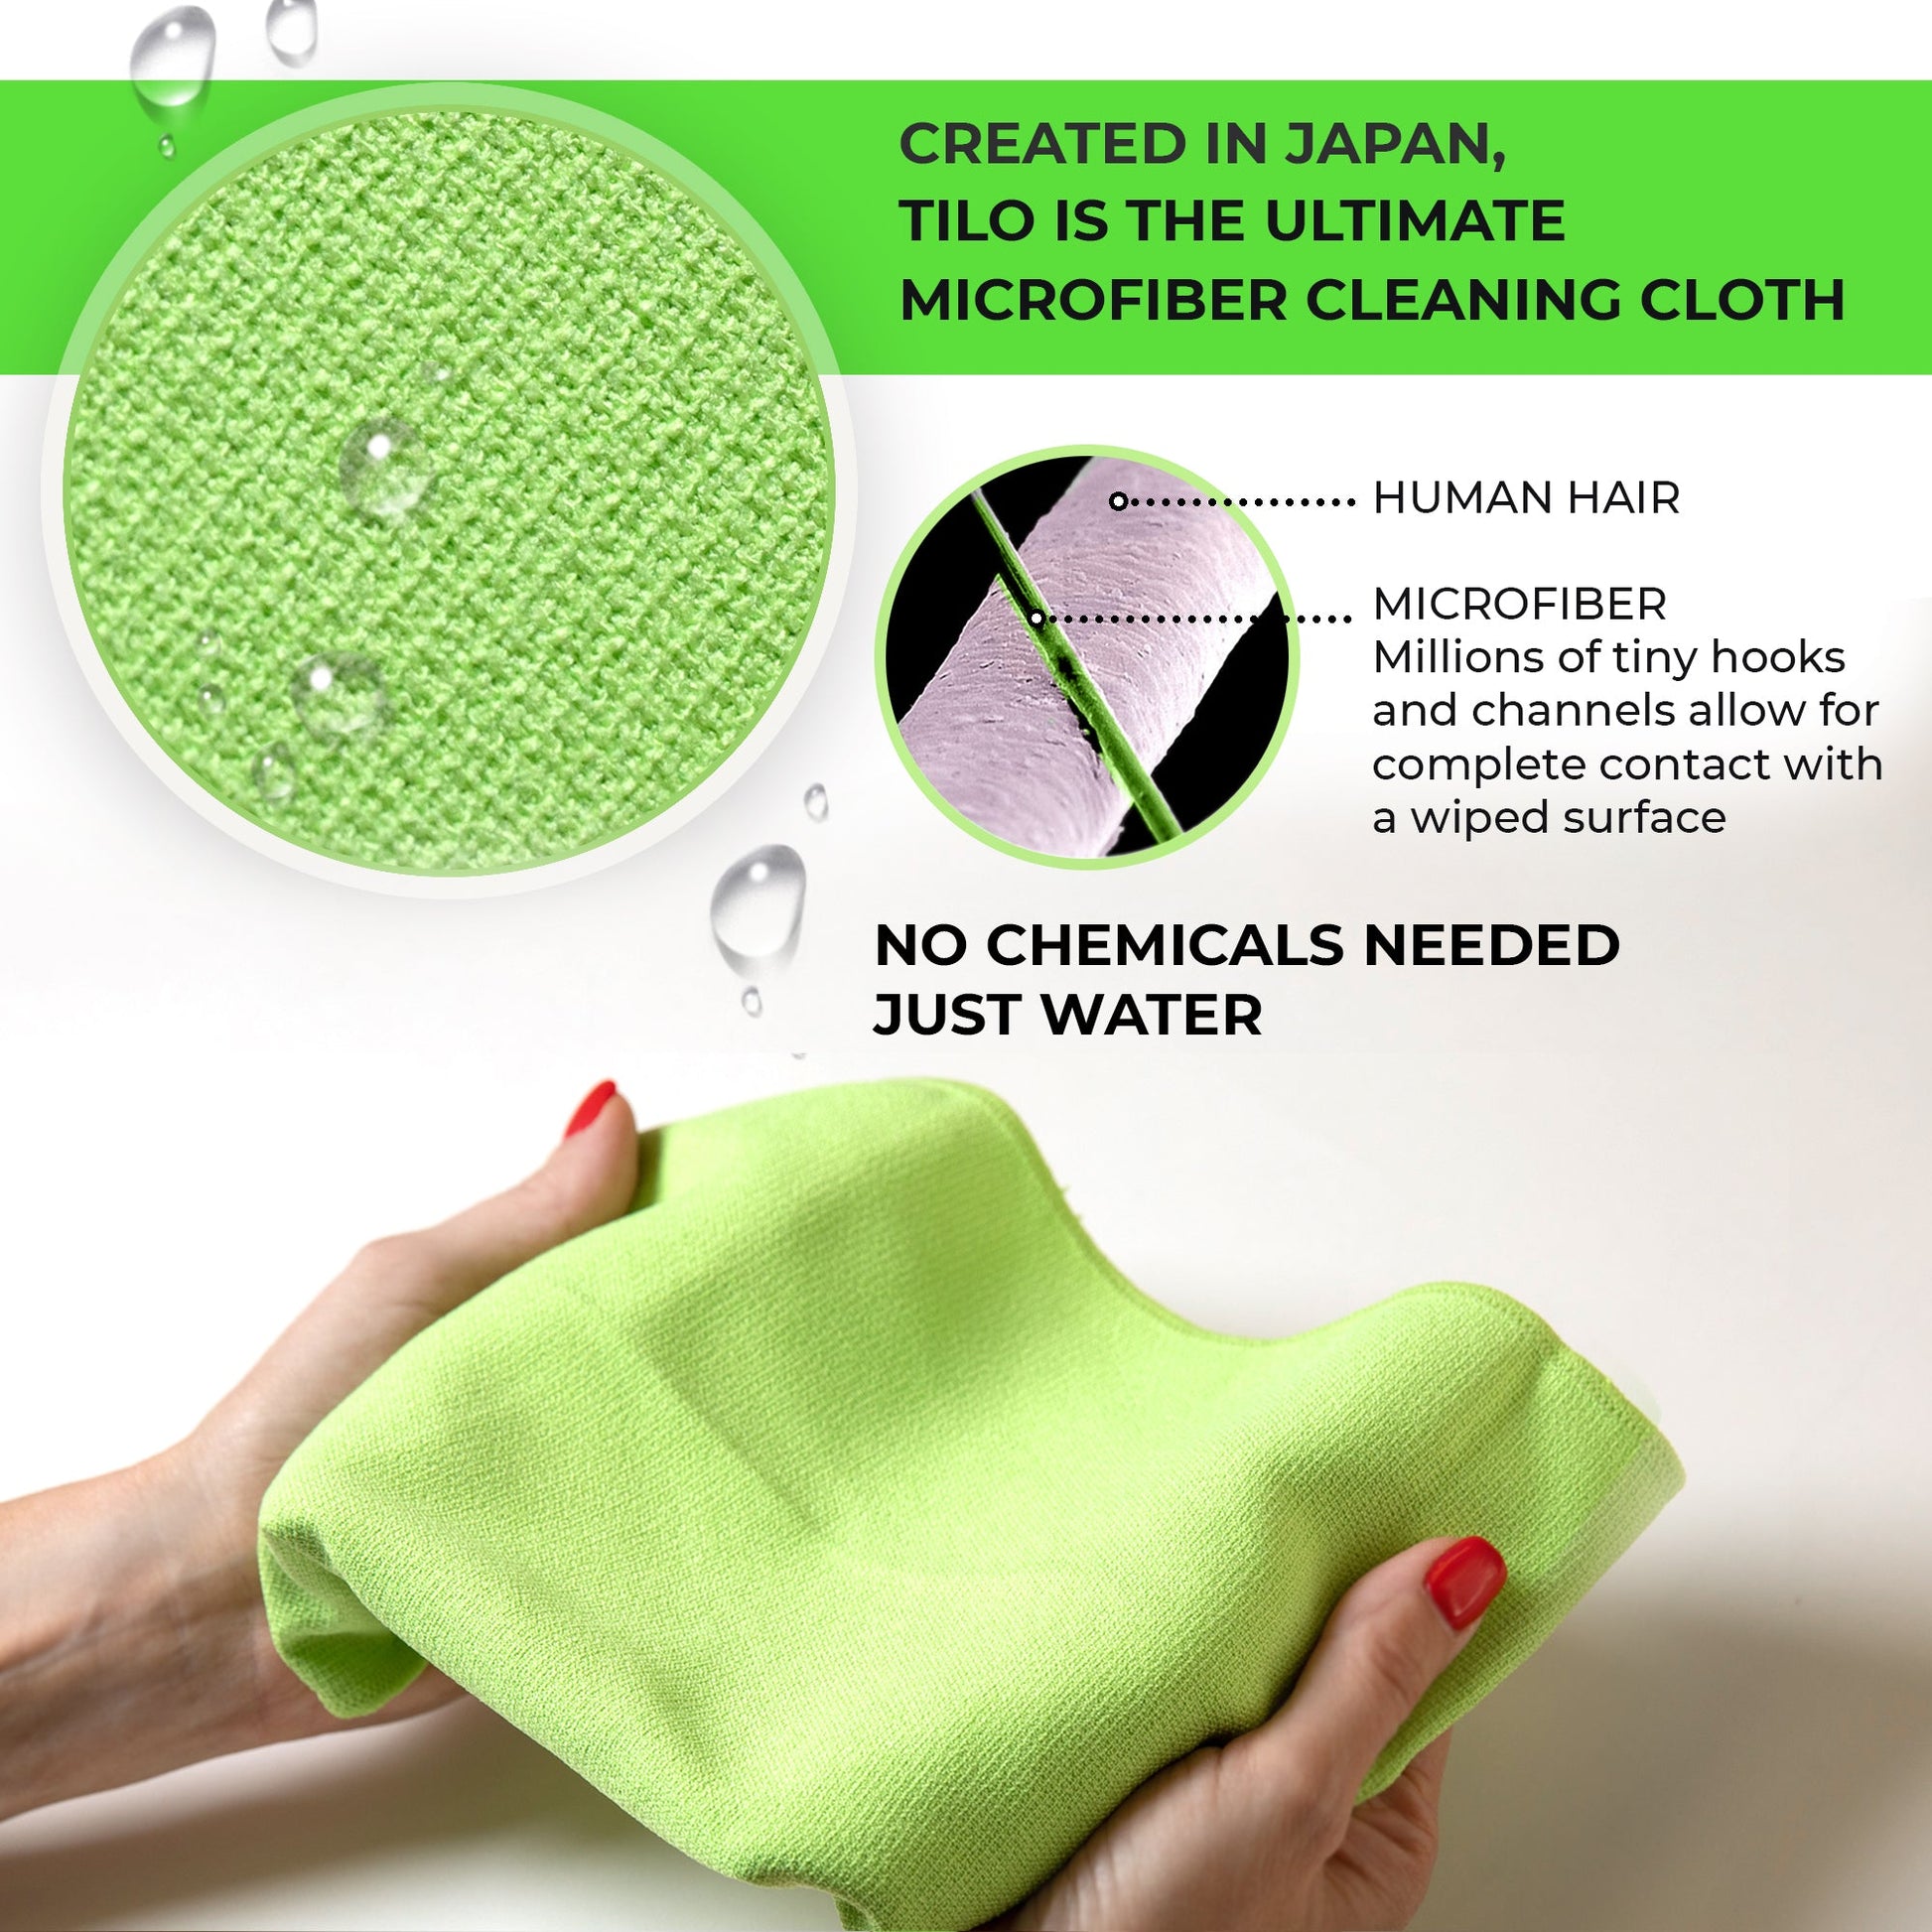 Cleaning Cloths – Who Provides Them?